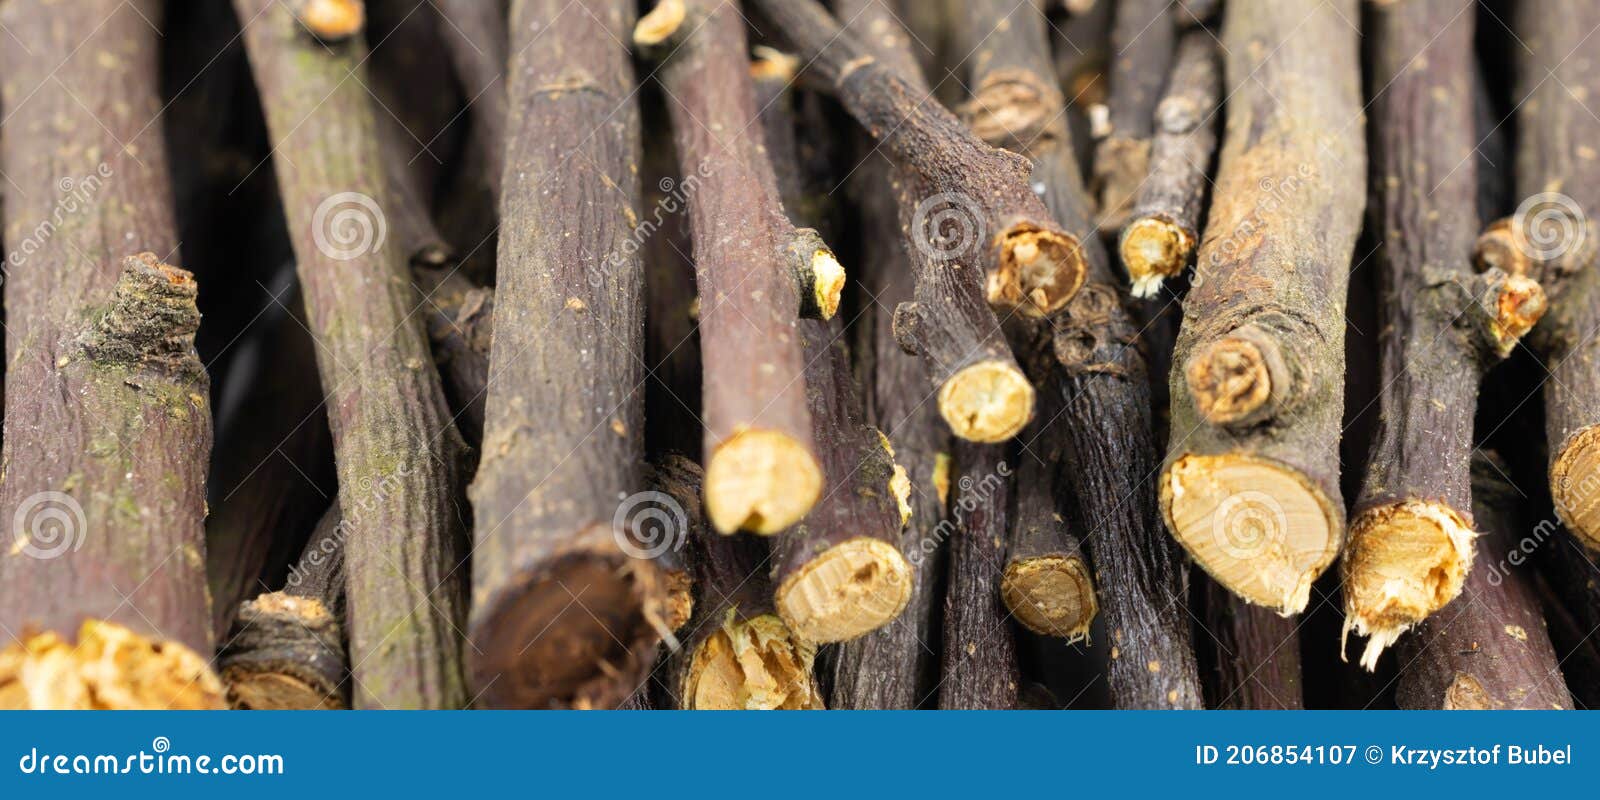 dried apple twigs with visible details. background or textura